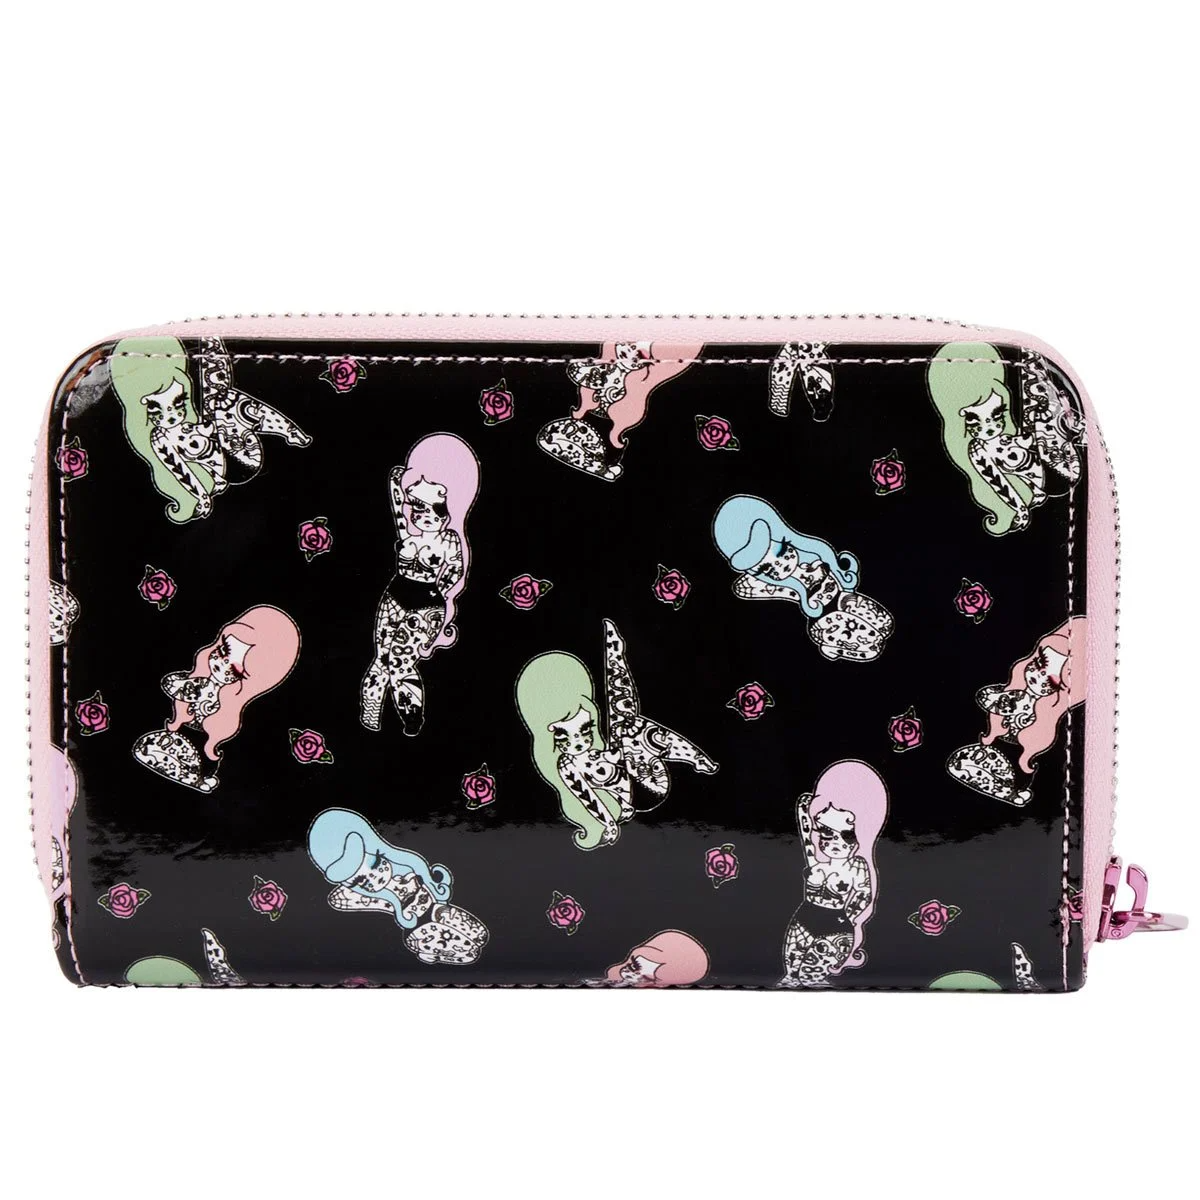 LOUNGEFLY VALFRE TATTOO ZIP WALLET